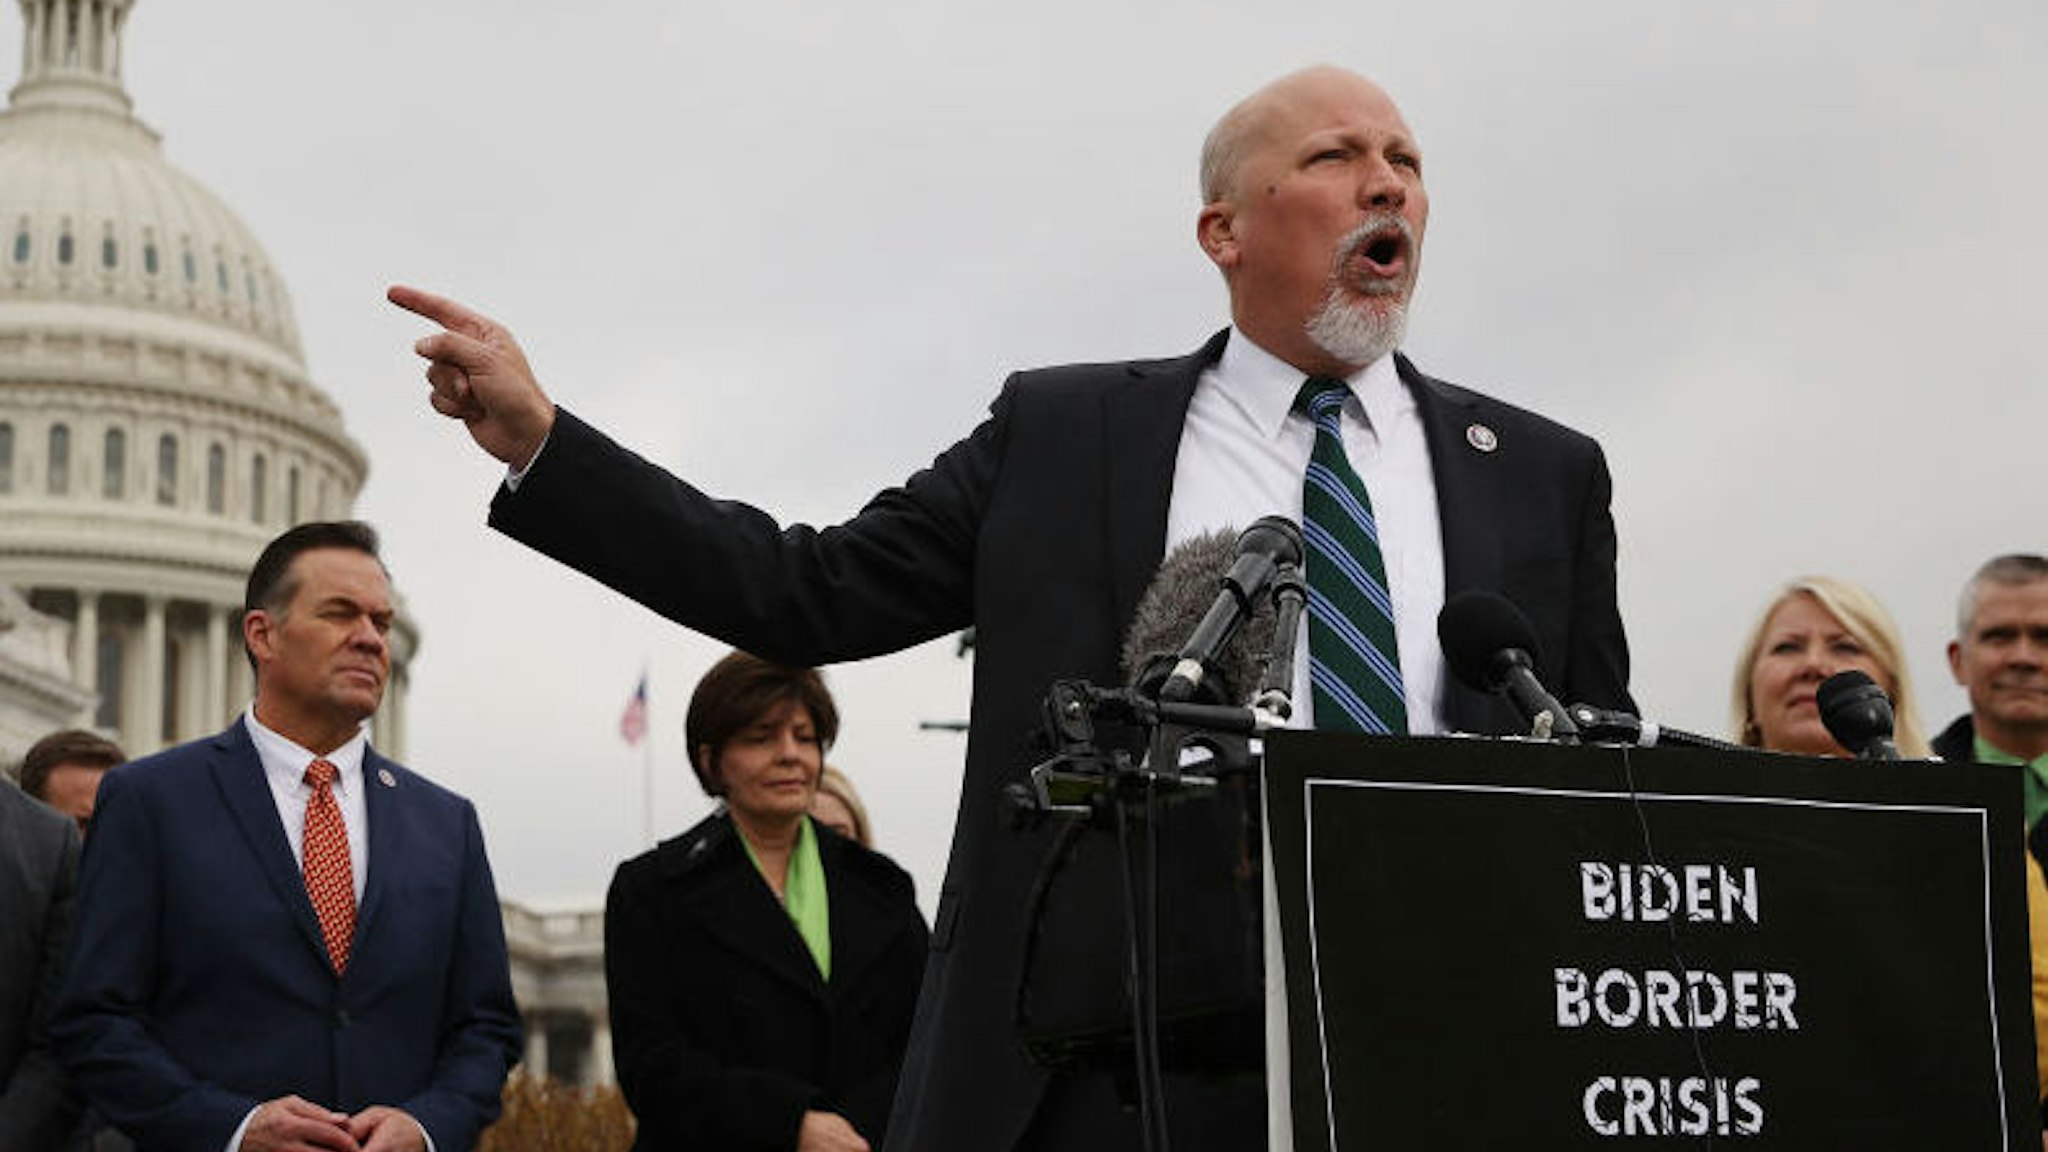 WASHINGTON, DC - MARCH 17: Rep. Chip Roy (R-TX) speaks during a news conference with members of the House Freedom Caucus about immigration on the U.S.-Mexico border outside the U.S. Capitol on March 17, 2021 in Washington, DC. Accusing the Biden Administration of partnering with with drug cartels, members of the conservative caucus listed numerous crimes along the border, including cattle rustling